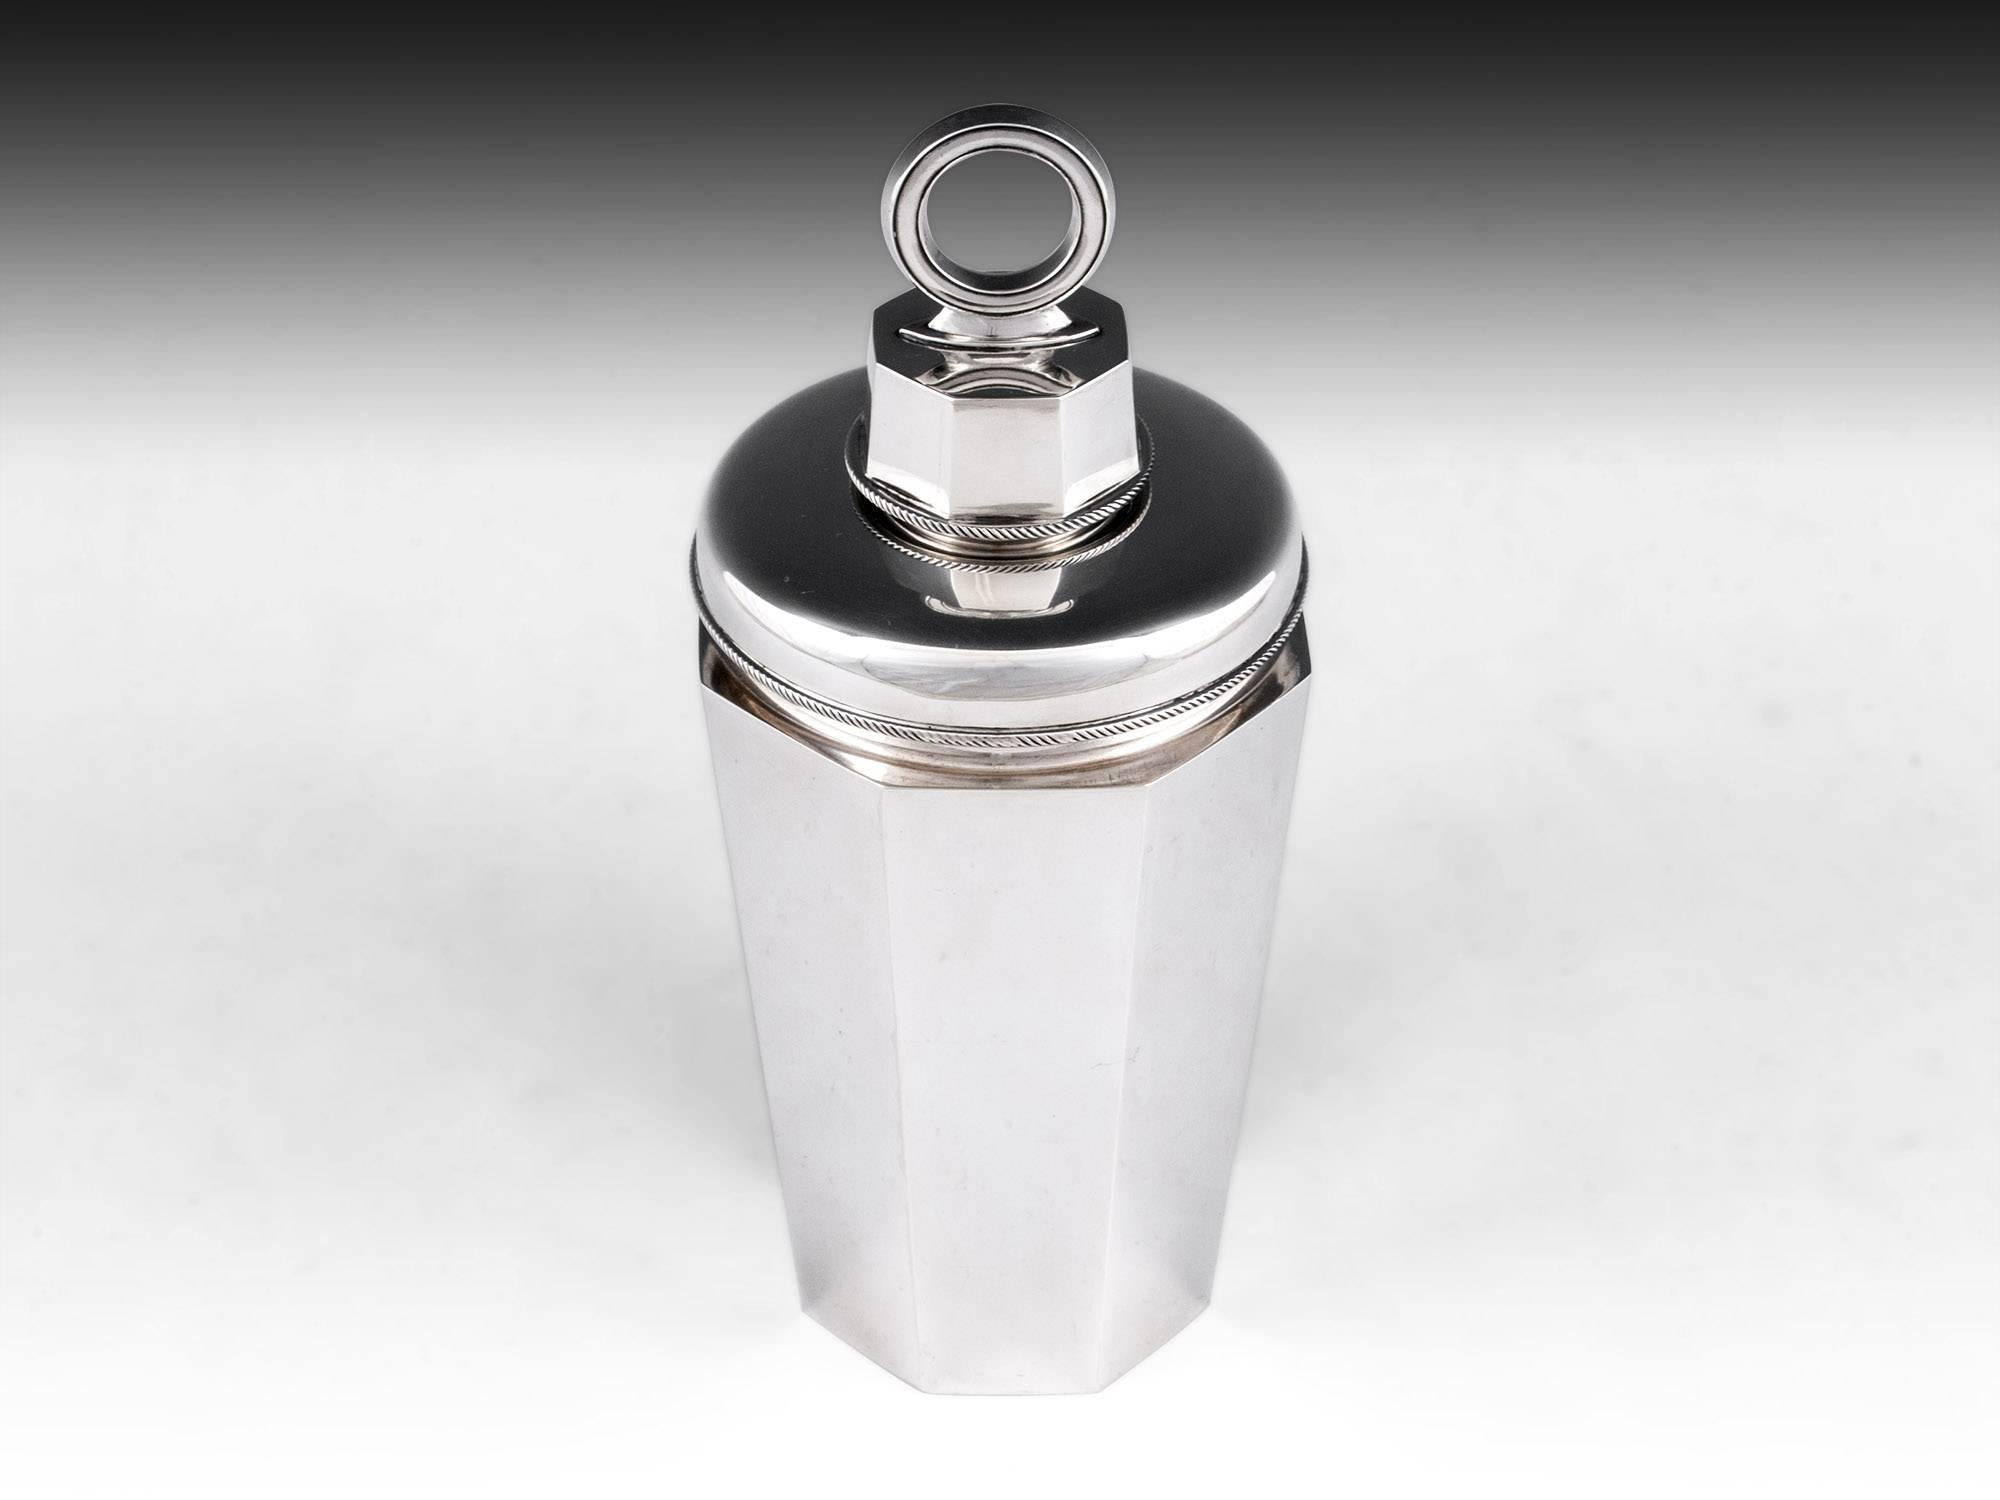 Norwegian solid silver octagonal tapered cocktail shaker with removable ring cap and separate strainer. Base hallmarked Sterling (925 silver standard), Norway, Oslo, Maker Jacob Tostrup (one of the most revered and collectible Norwegian silversmiths